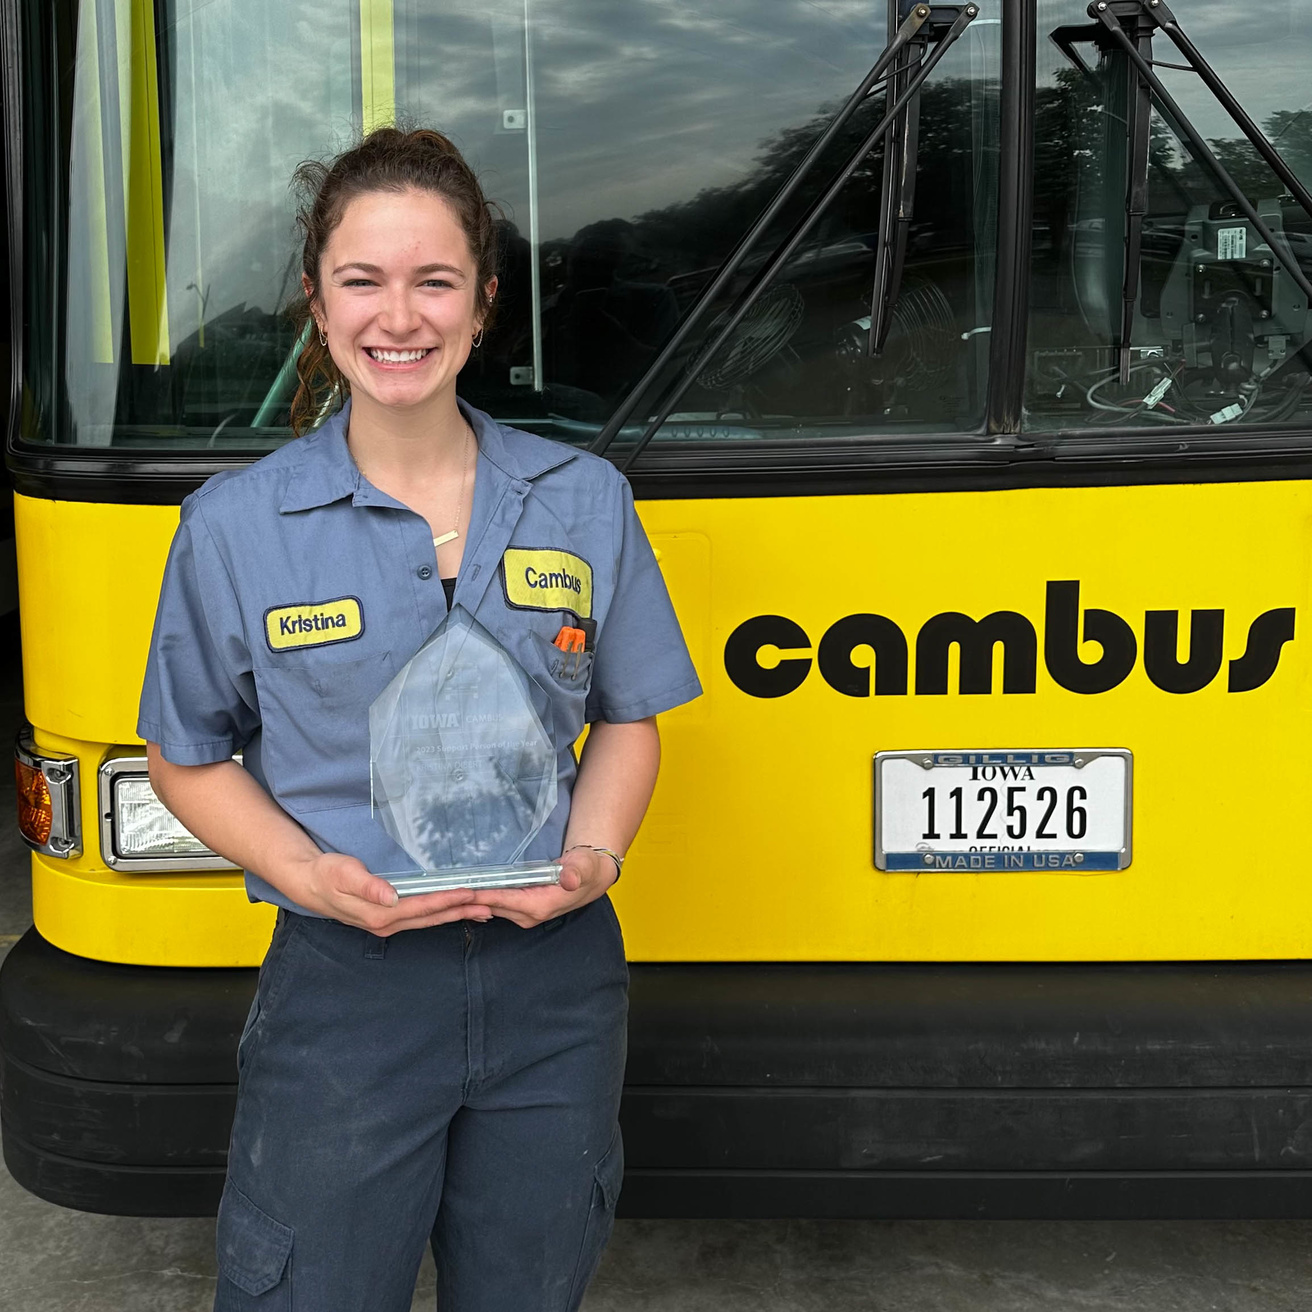 Kristina Dibert poses with her award in front of a CAMBUS